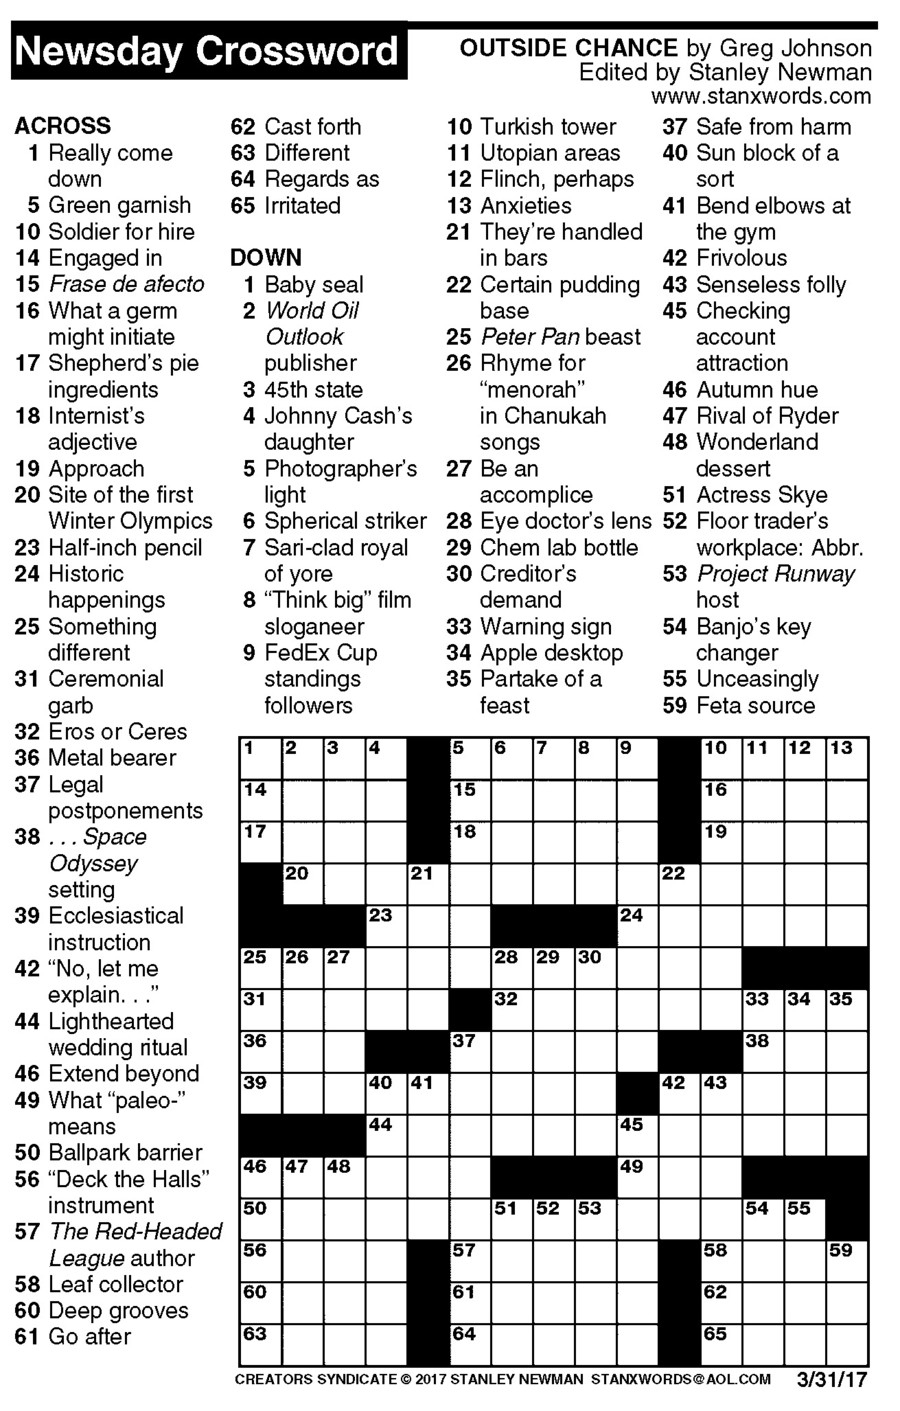 Newsday Crossword Puzzle For Mar 31, 2017,stanley Newman - Printable Crossword Newsday